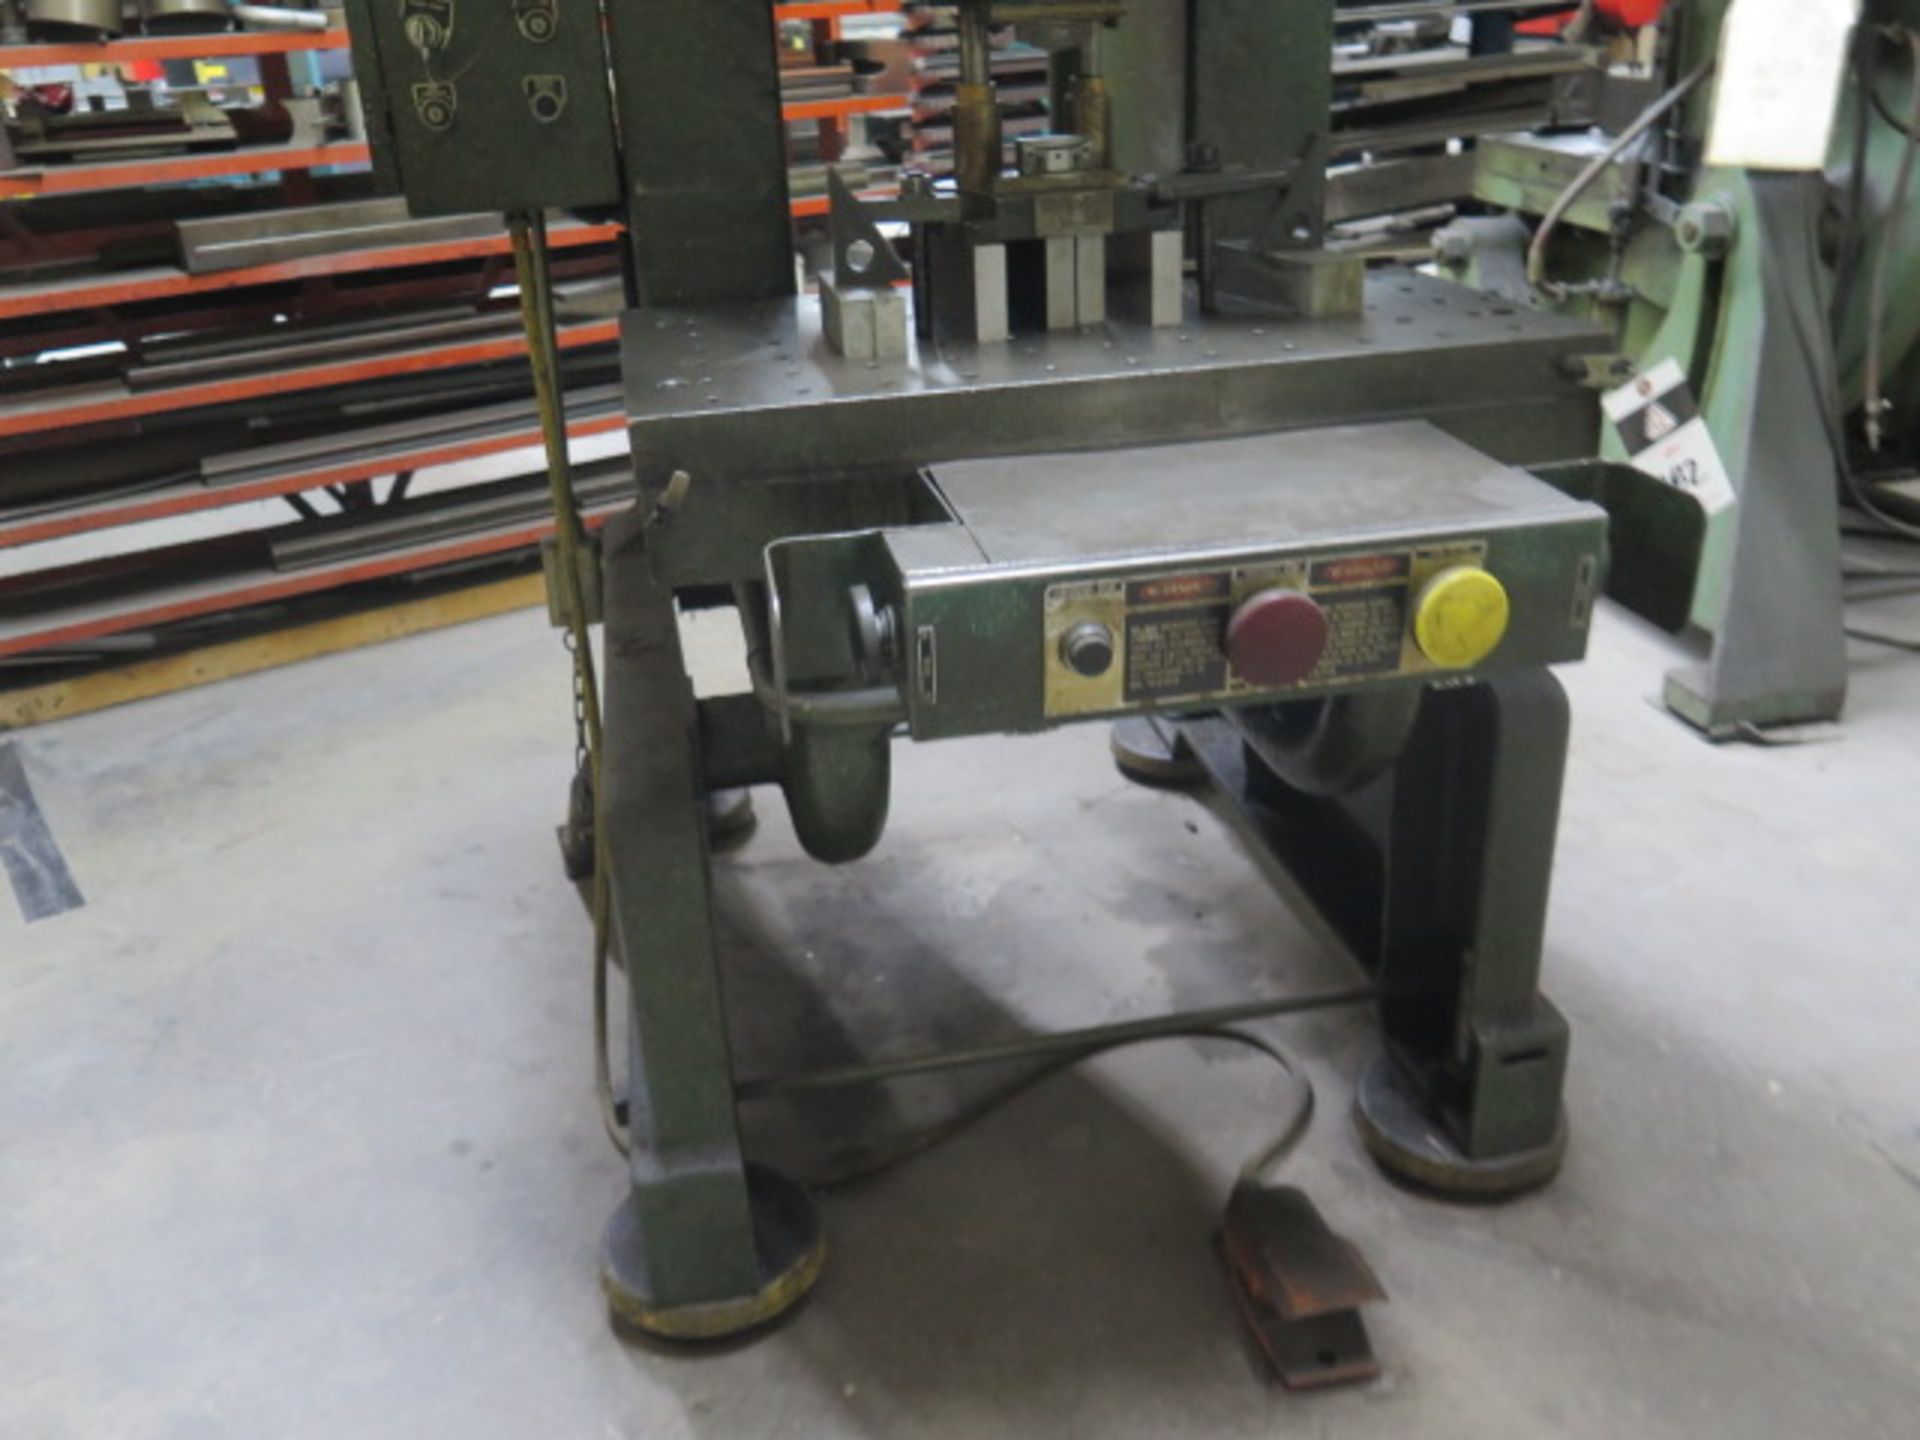 Rousselle No. 6A 60 Ton OBI Stamping Press SOLD AS PARTS ONLY, SOLD AS IS - NO WARRANTY - Image 6 of 11